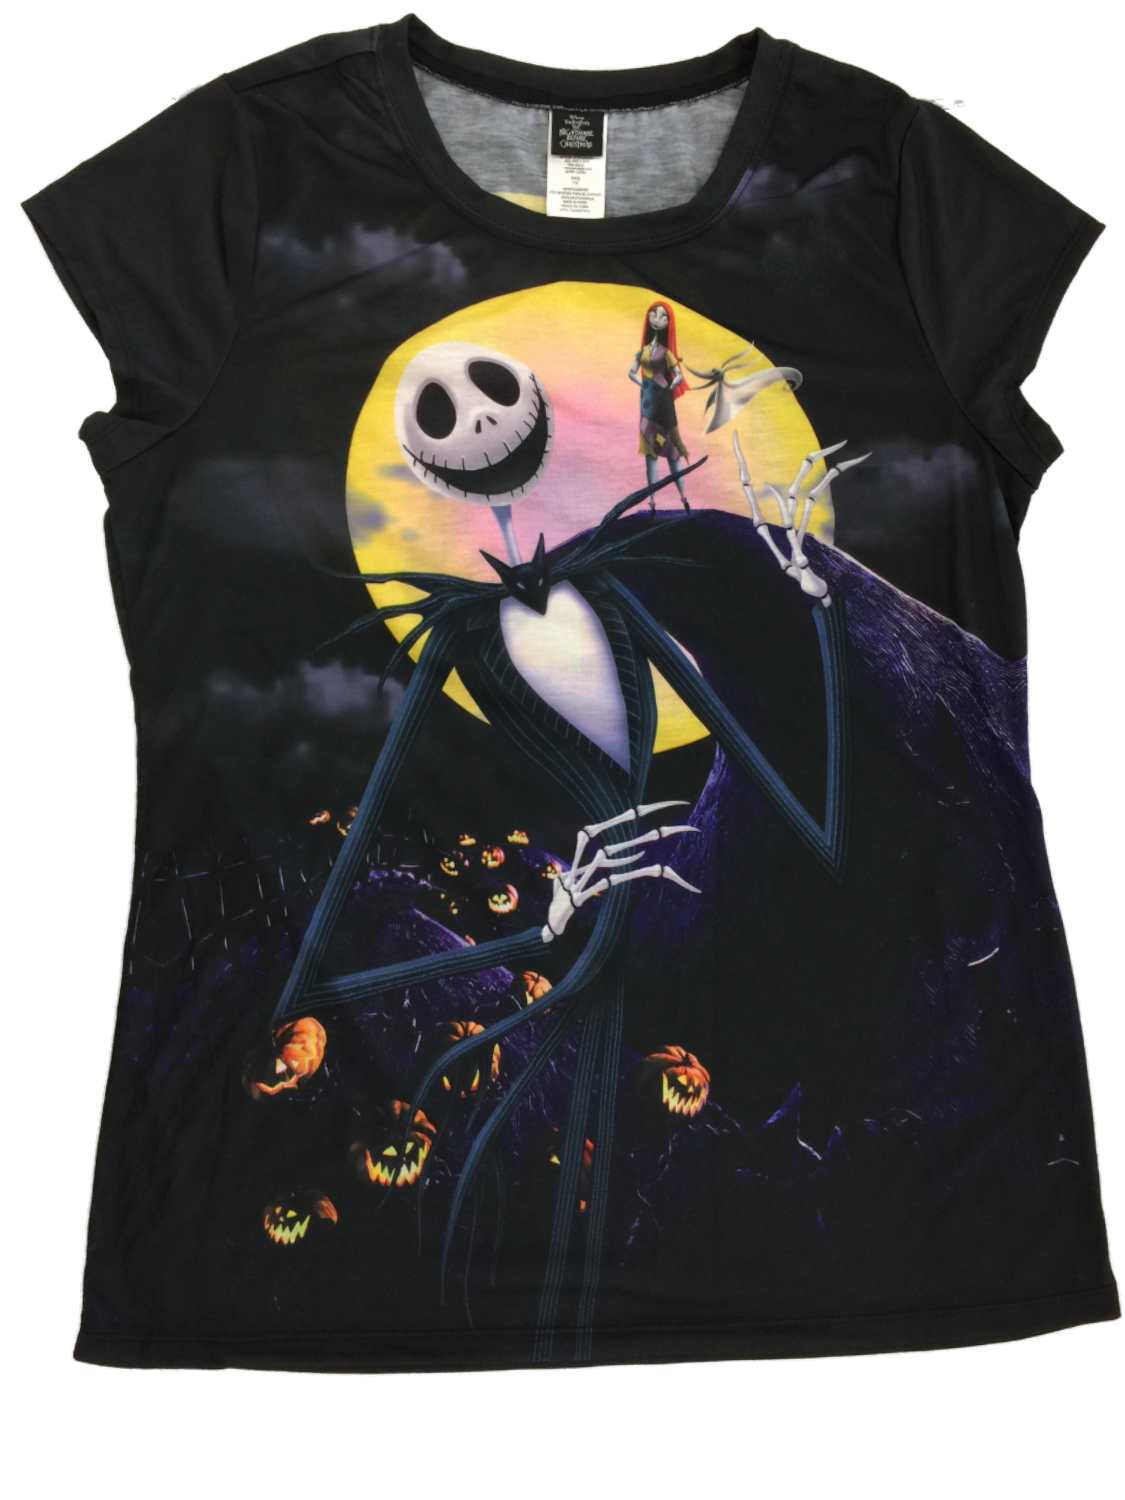 S-3XL New Jack Skellington The Nightmare Before Christmas Women Top Sublimation Style 3 